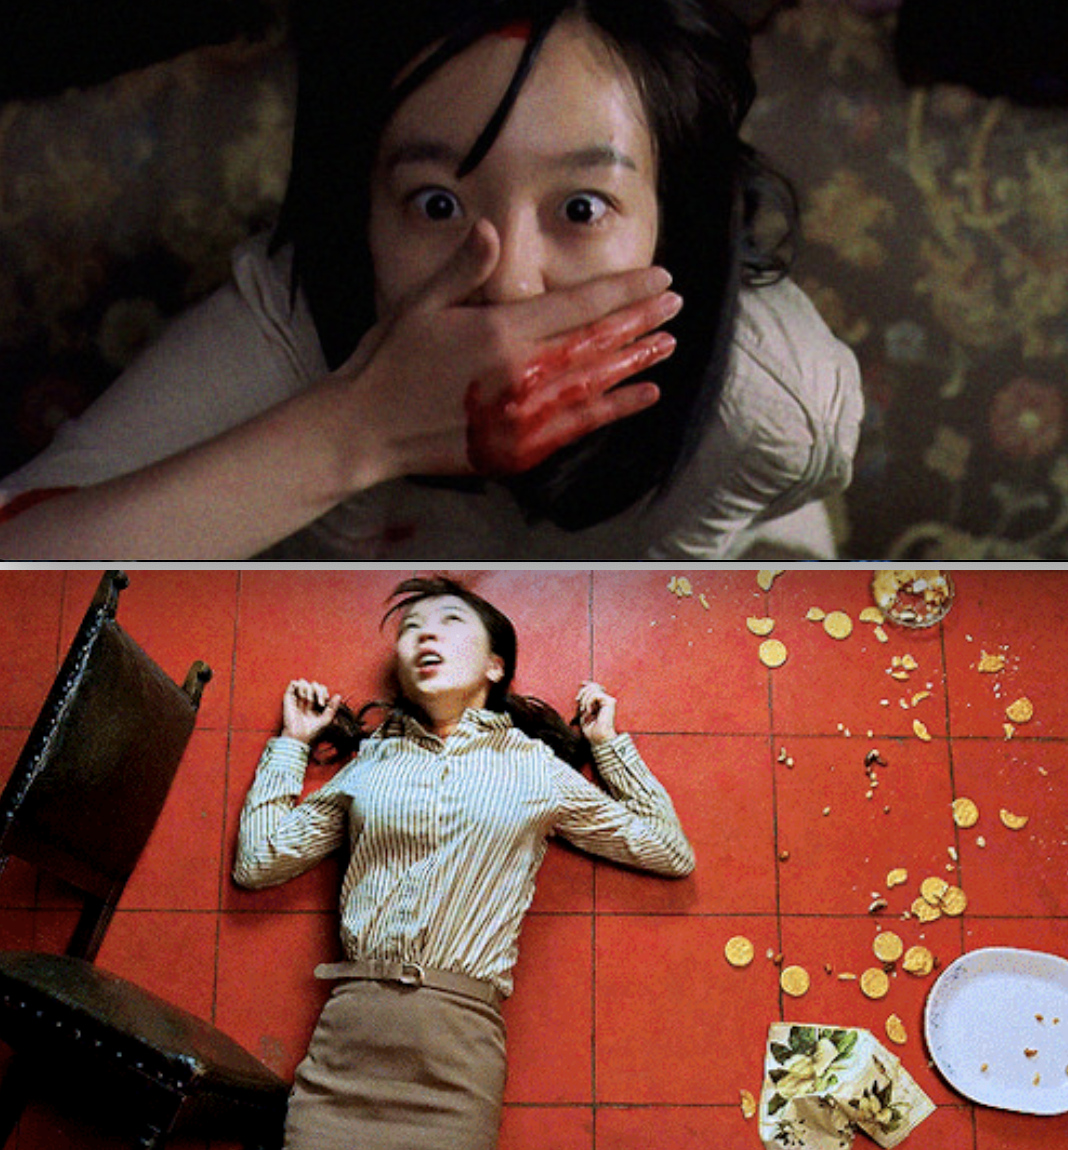 One woman with a bloodied hand covering her mouth, and the other lying on the floor